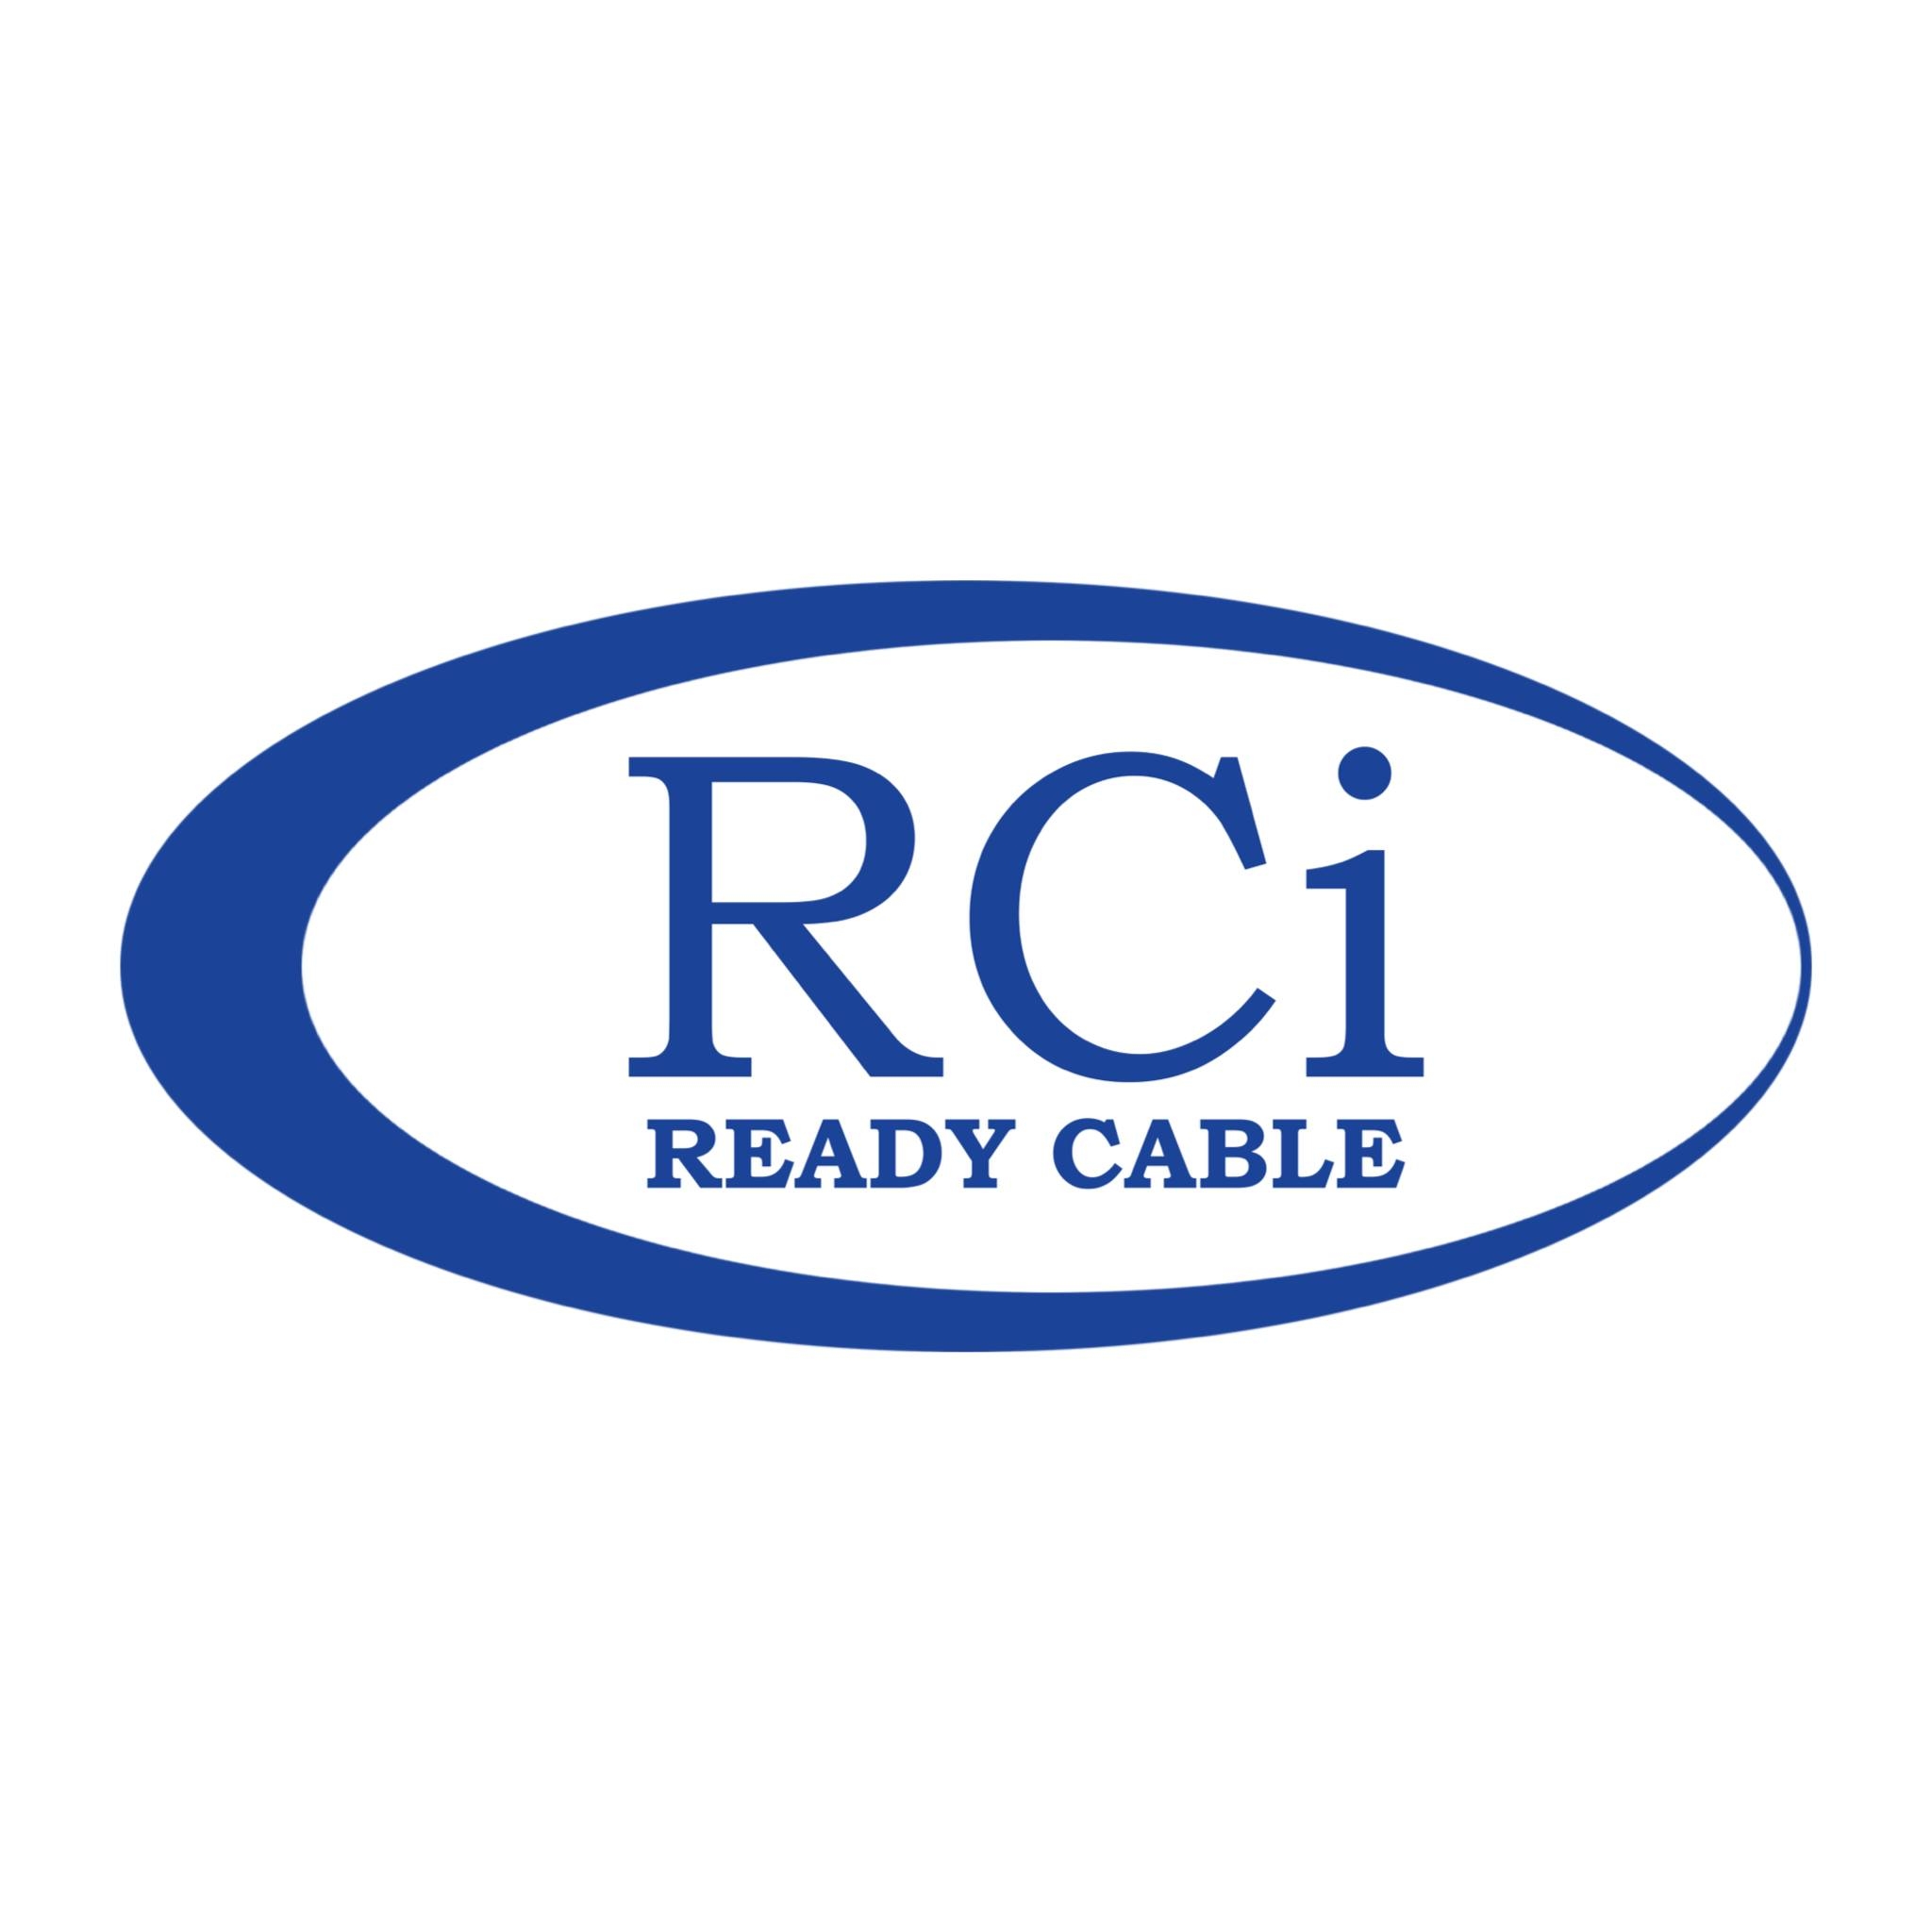 Ready Cable